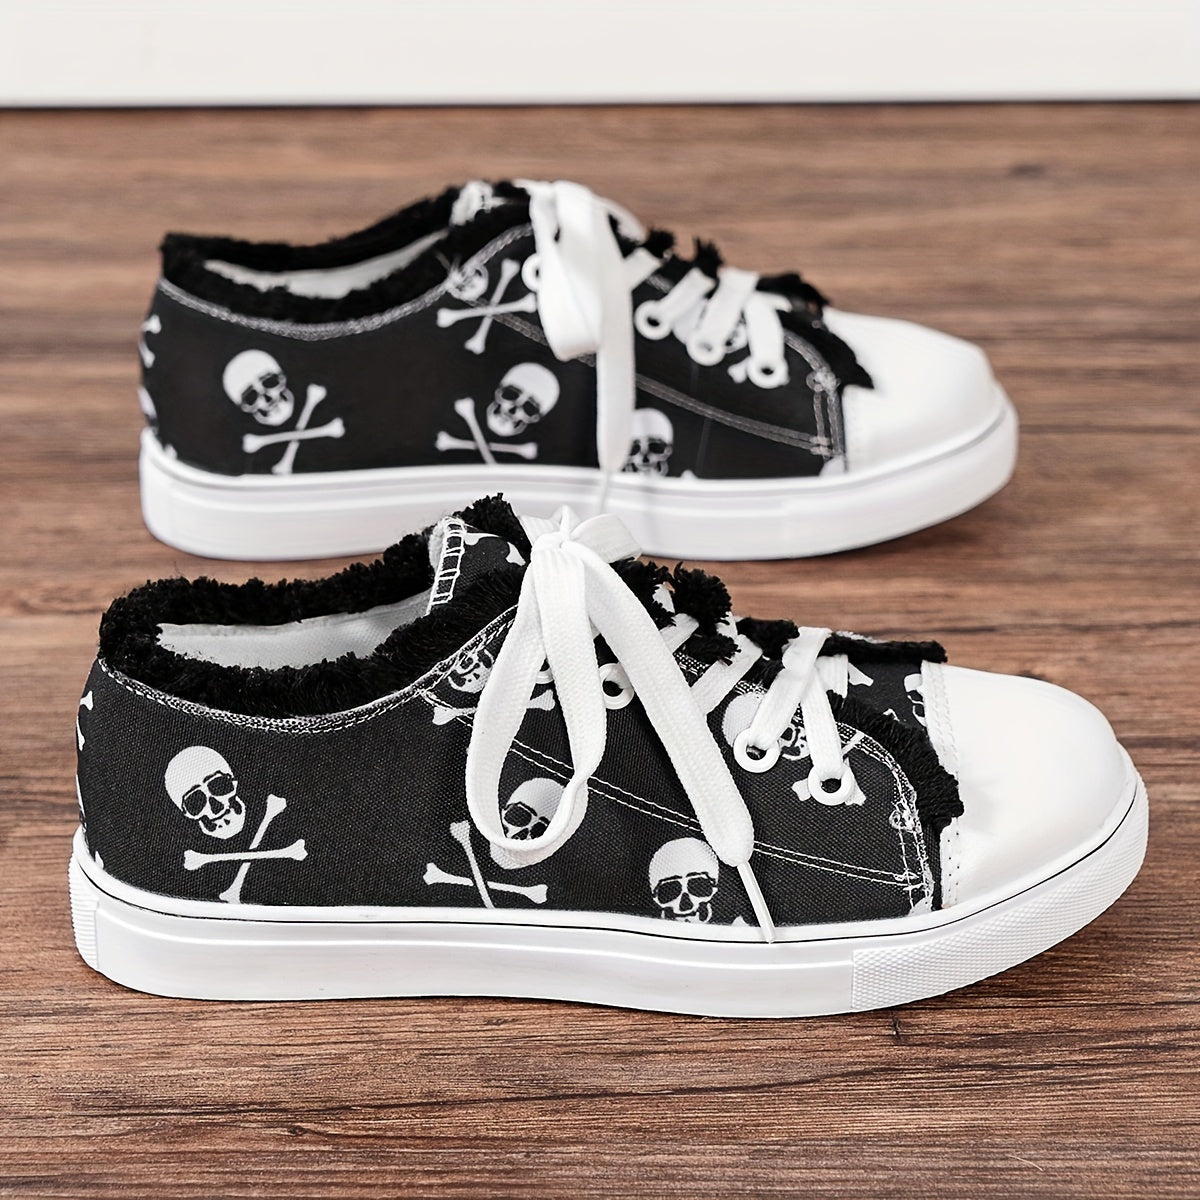 Women's Skull Pattern Canvas Shoes, Casual Lace Up Low Top Shoes, Lightweight Outdoor Halloween Sneakers